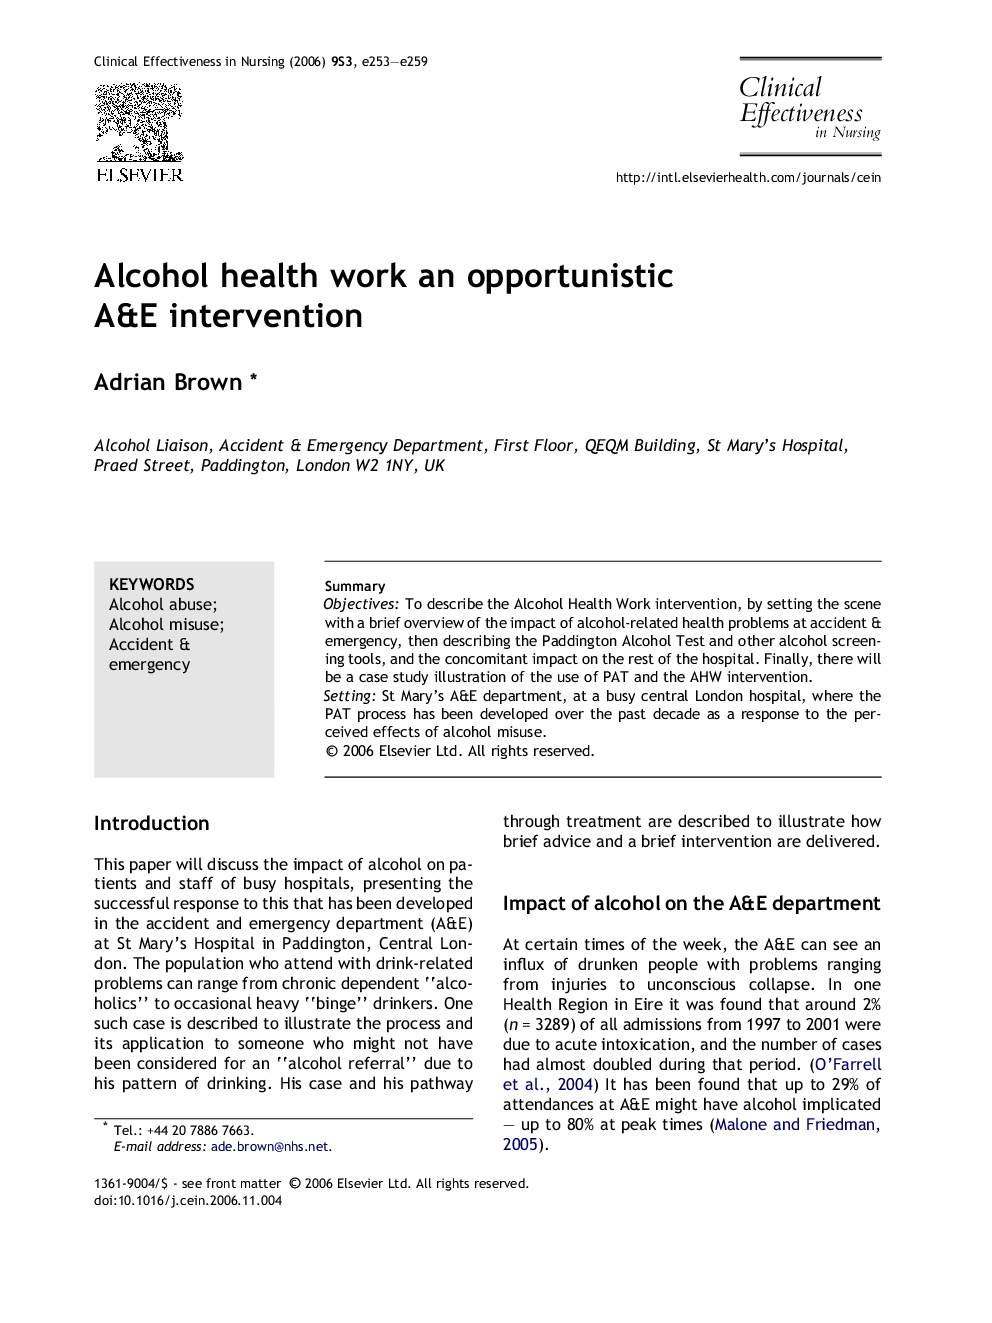 Alcohol health work an opportunistic A&E intervention